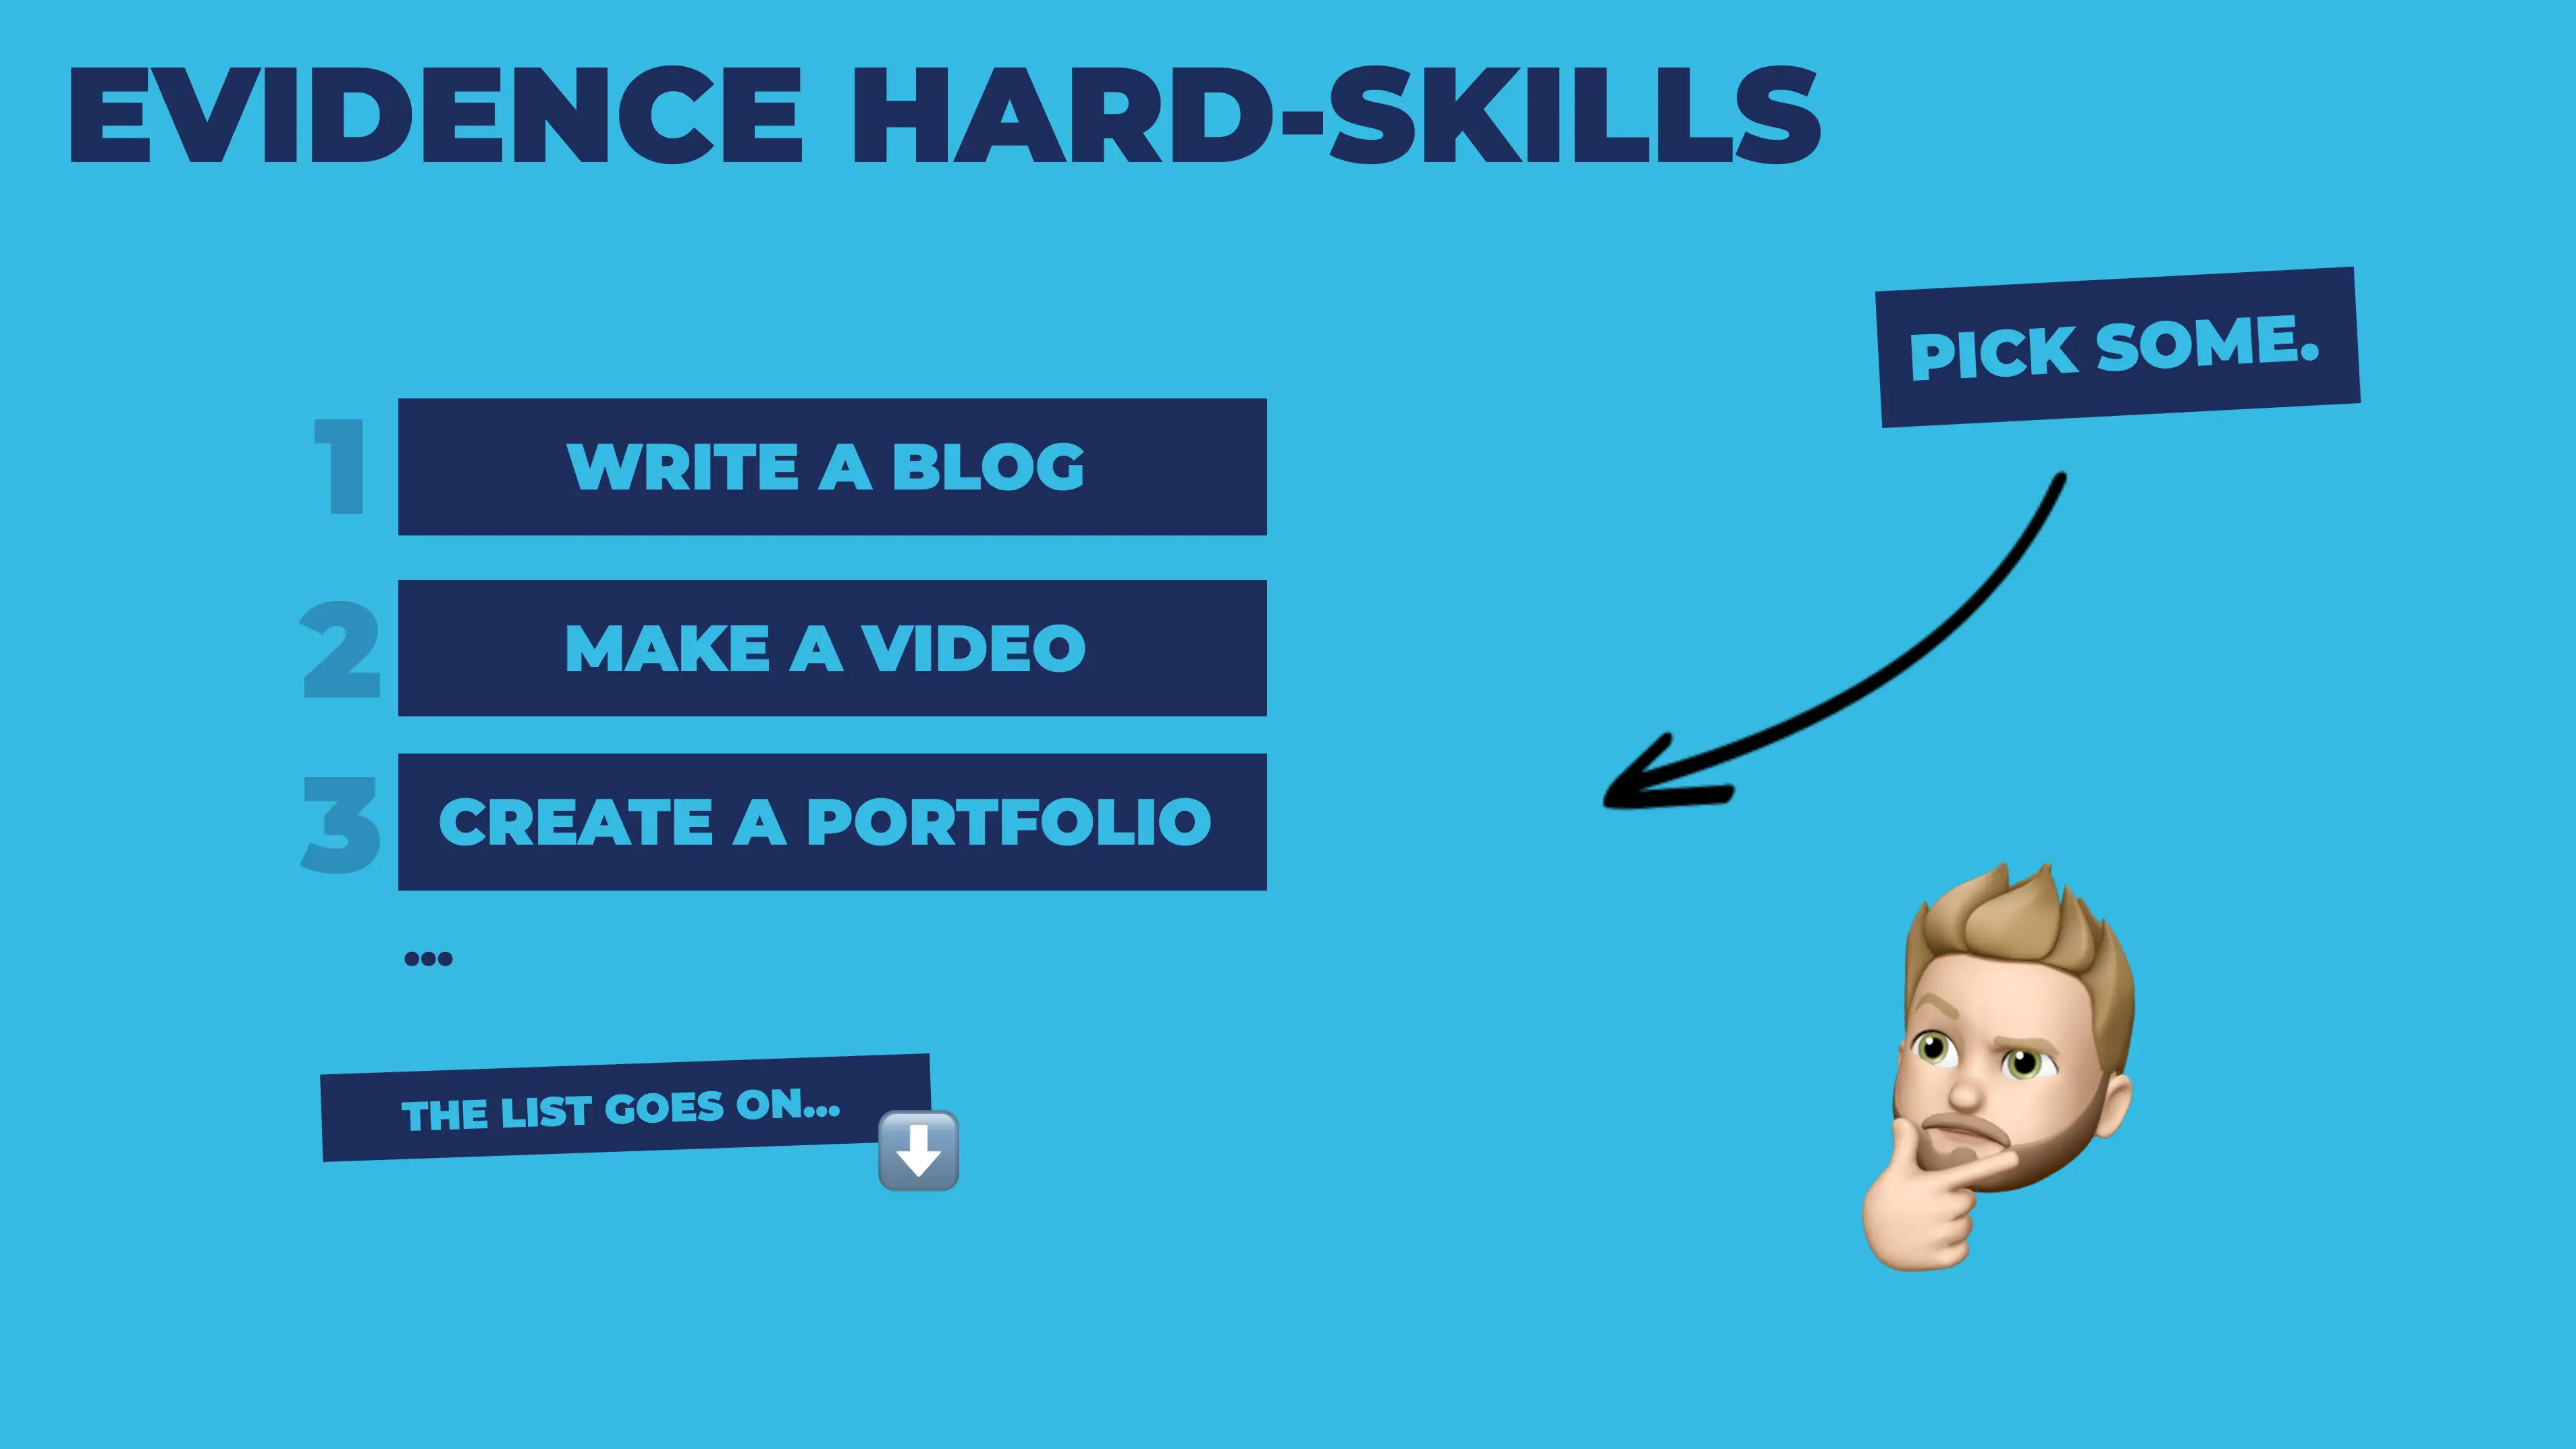 Evidence hard skills, such as writing a blog, making a video, or creating a portfolio